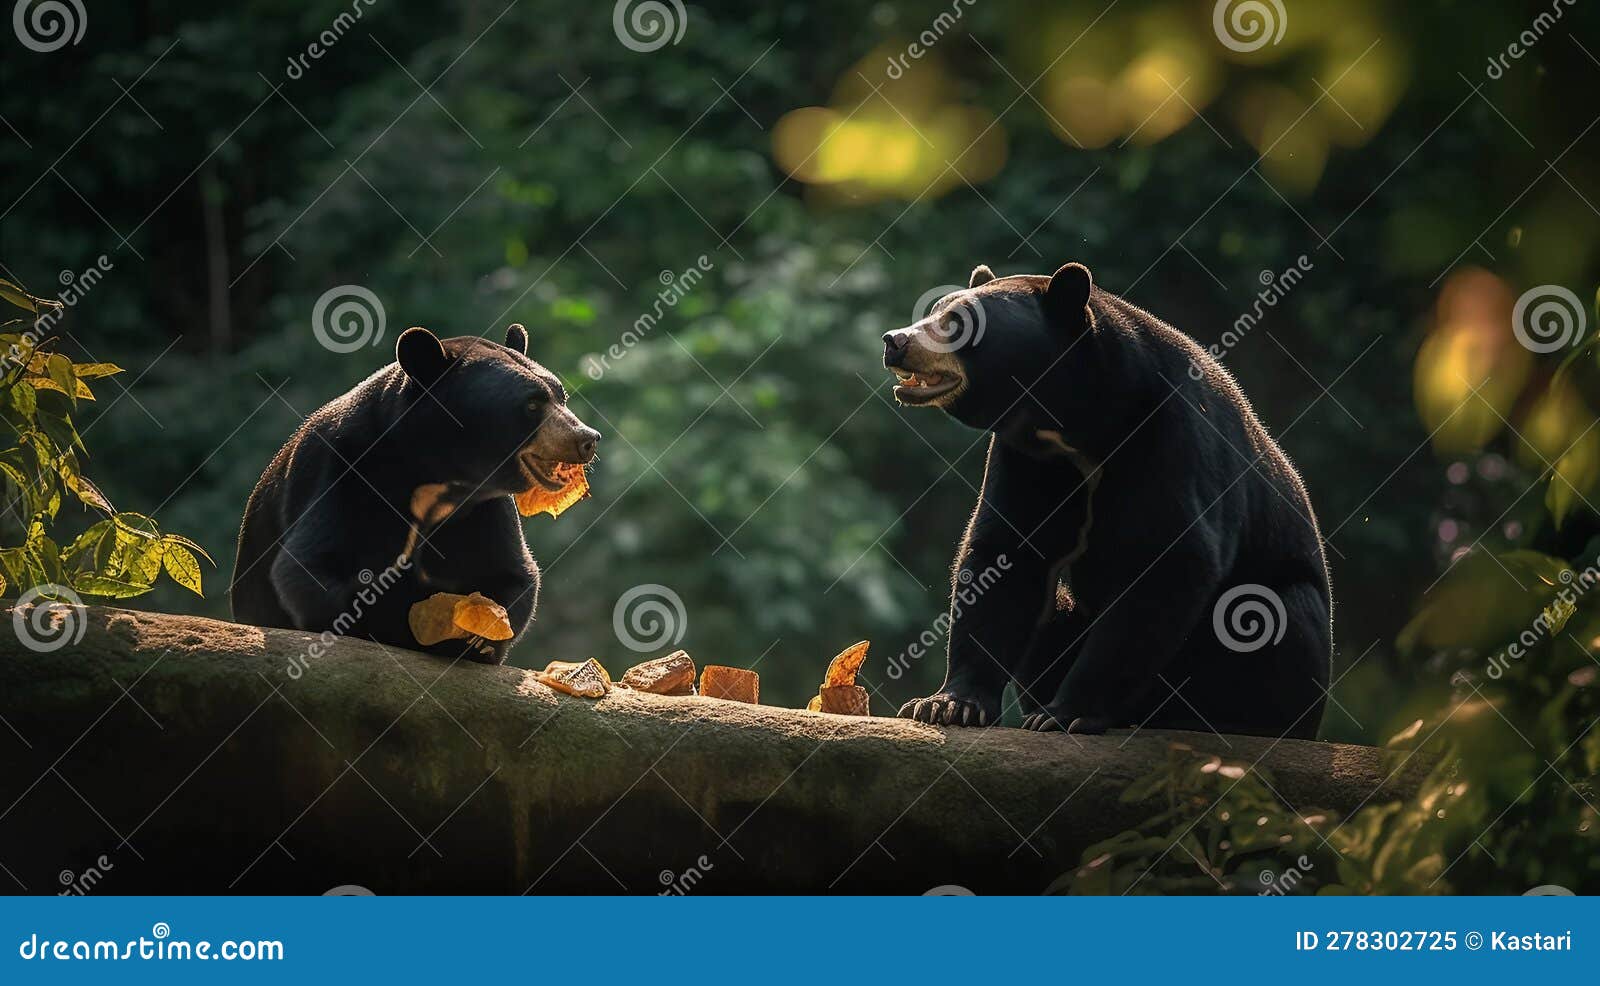 two sun bears are playing together in the forest